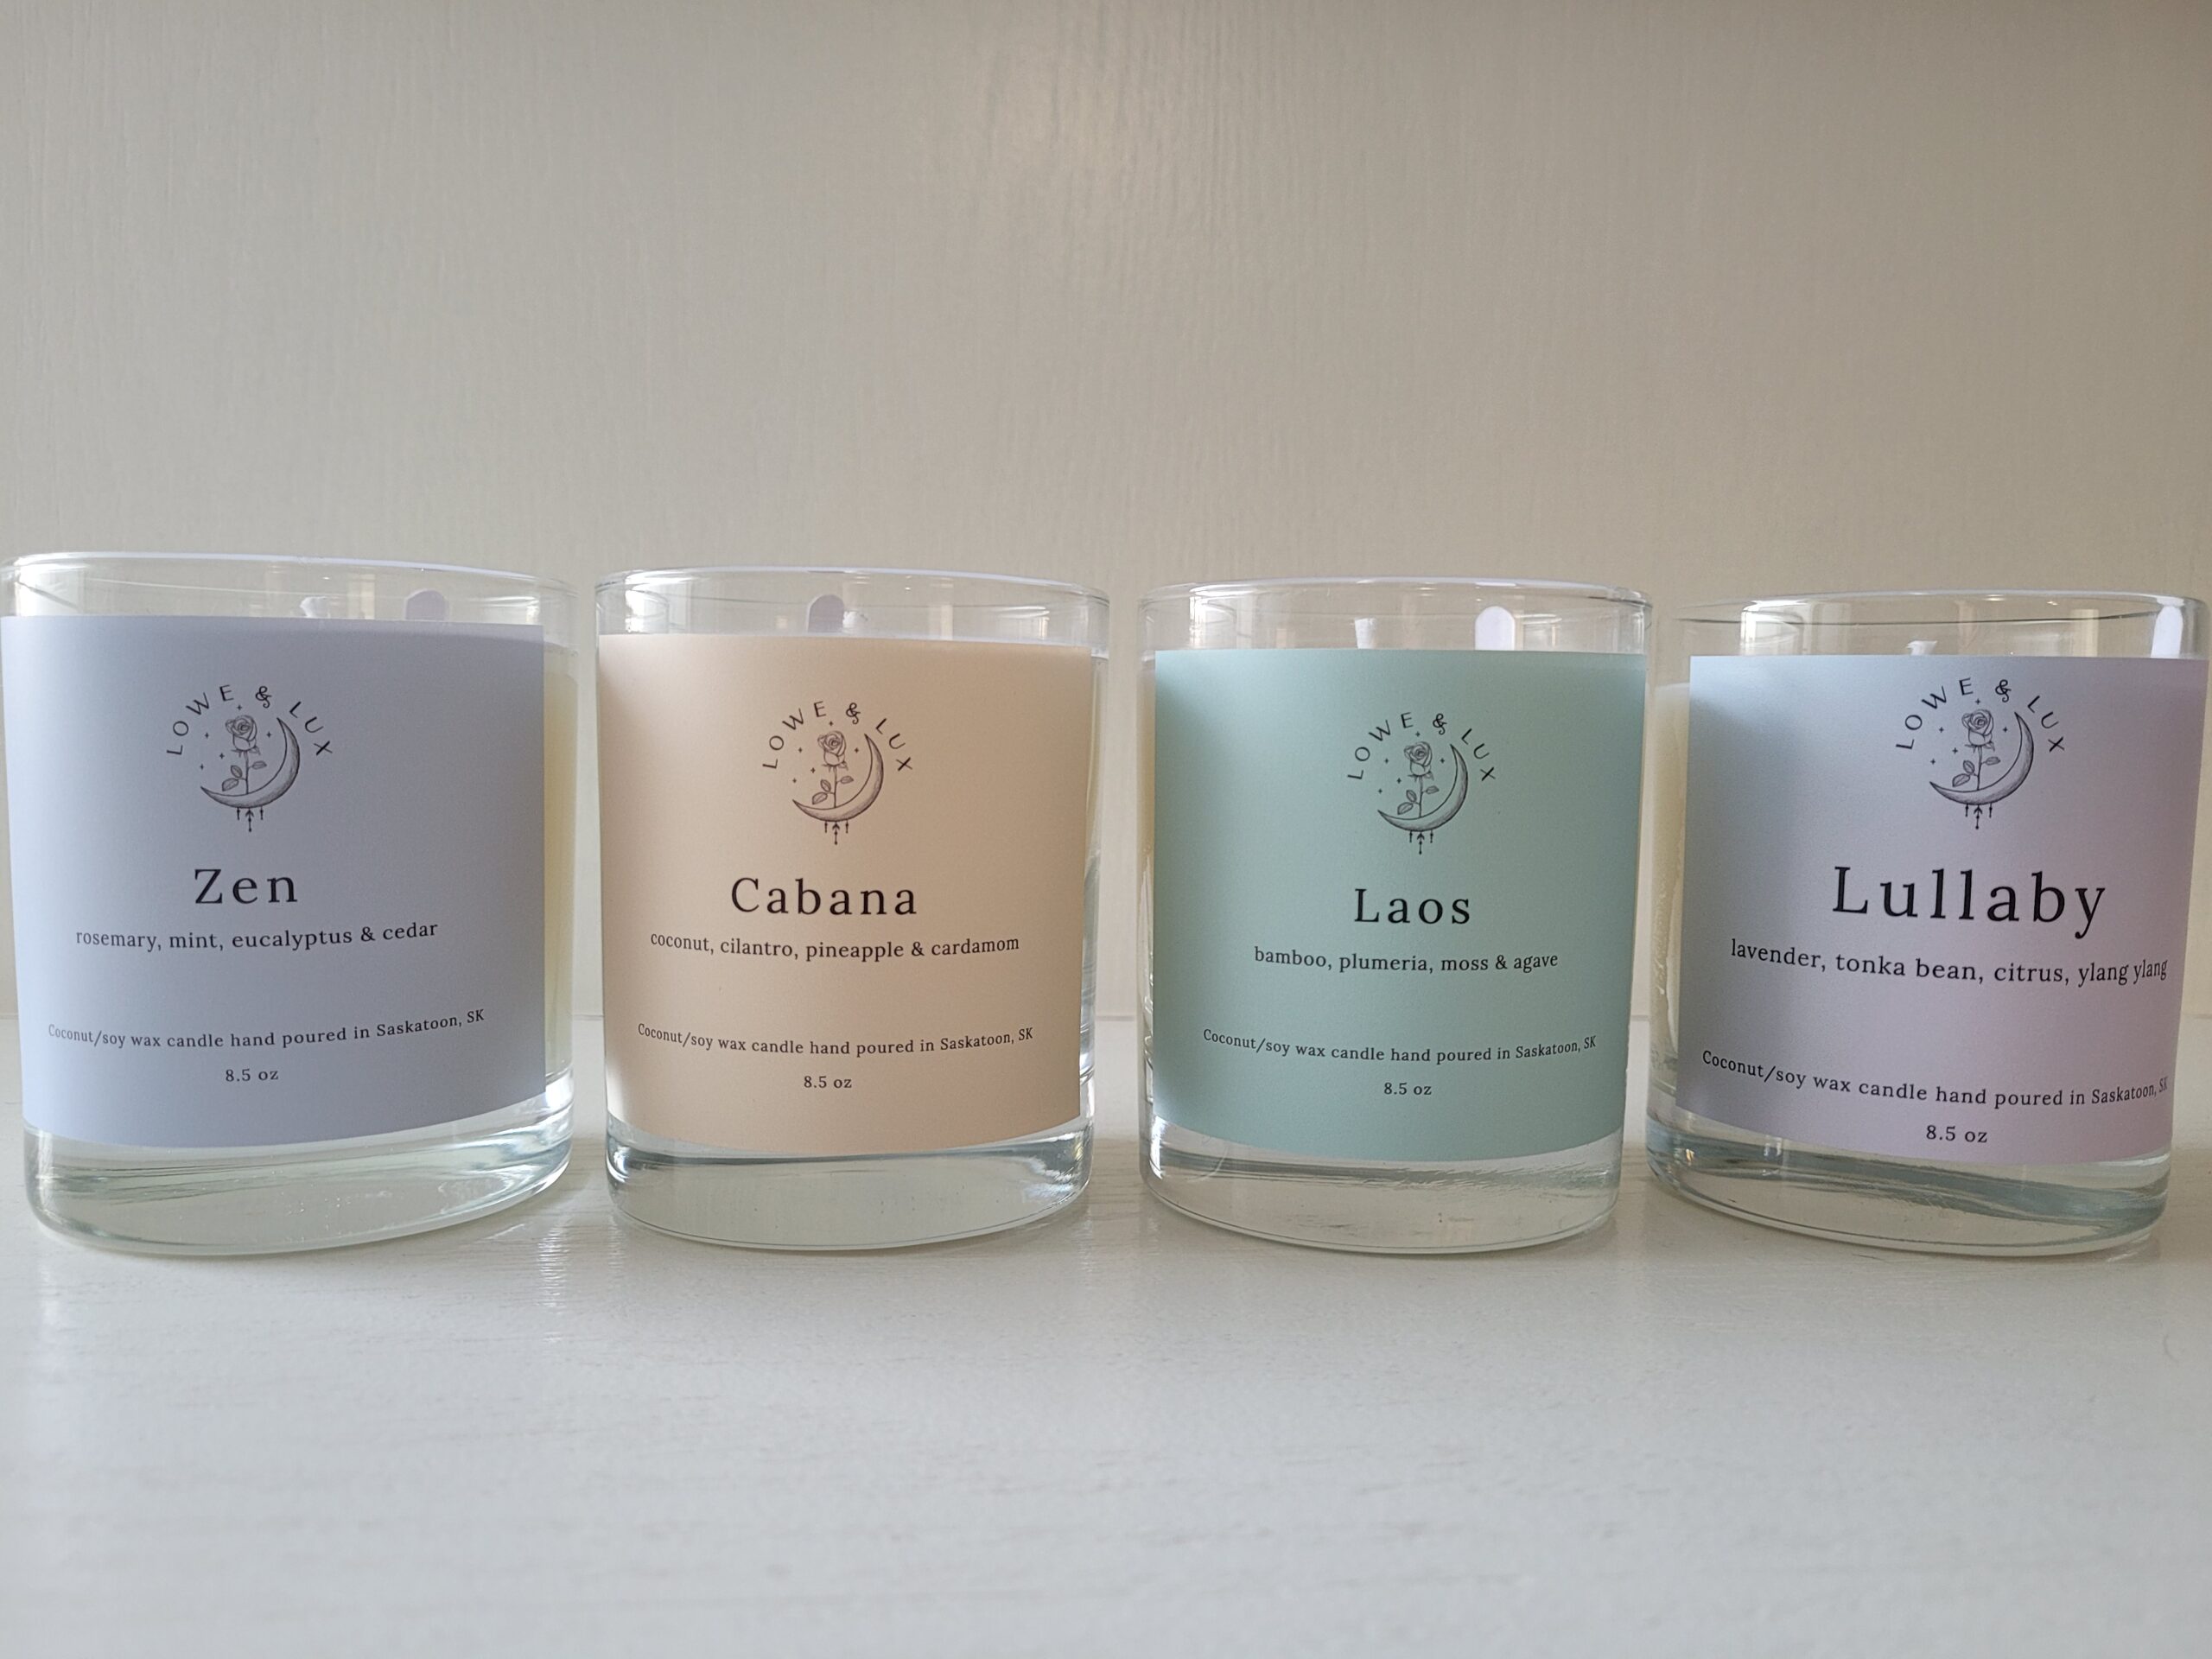 Winter is Candle Season